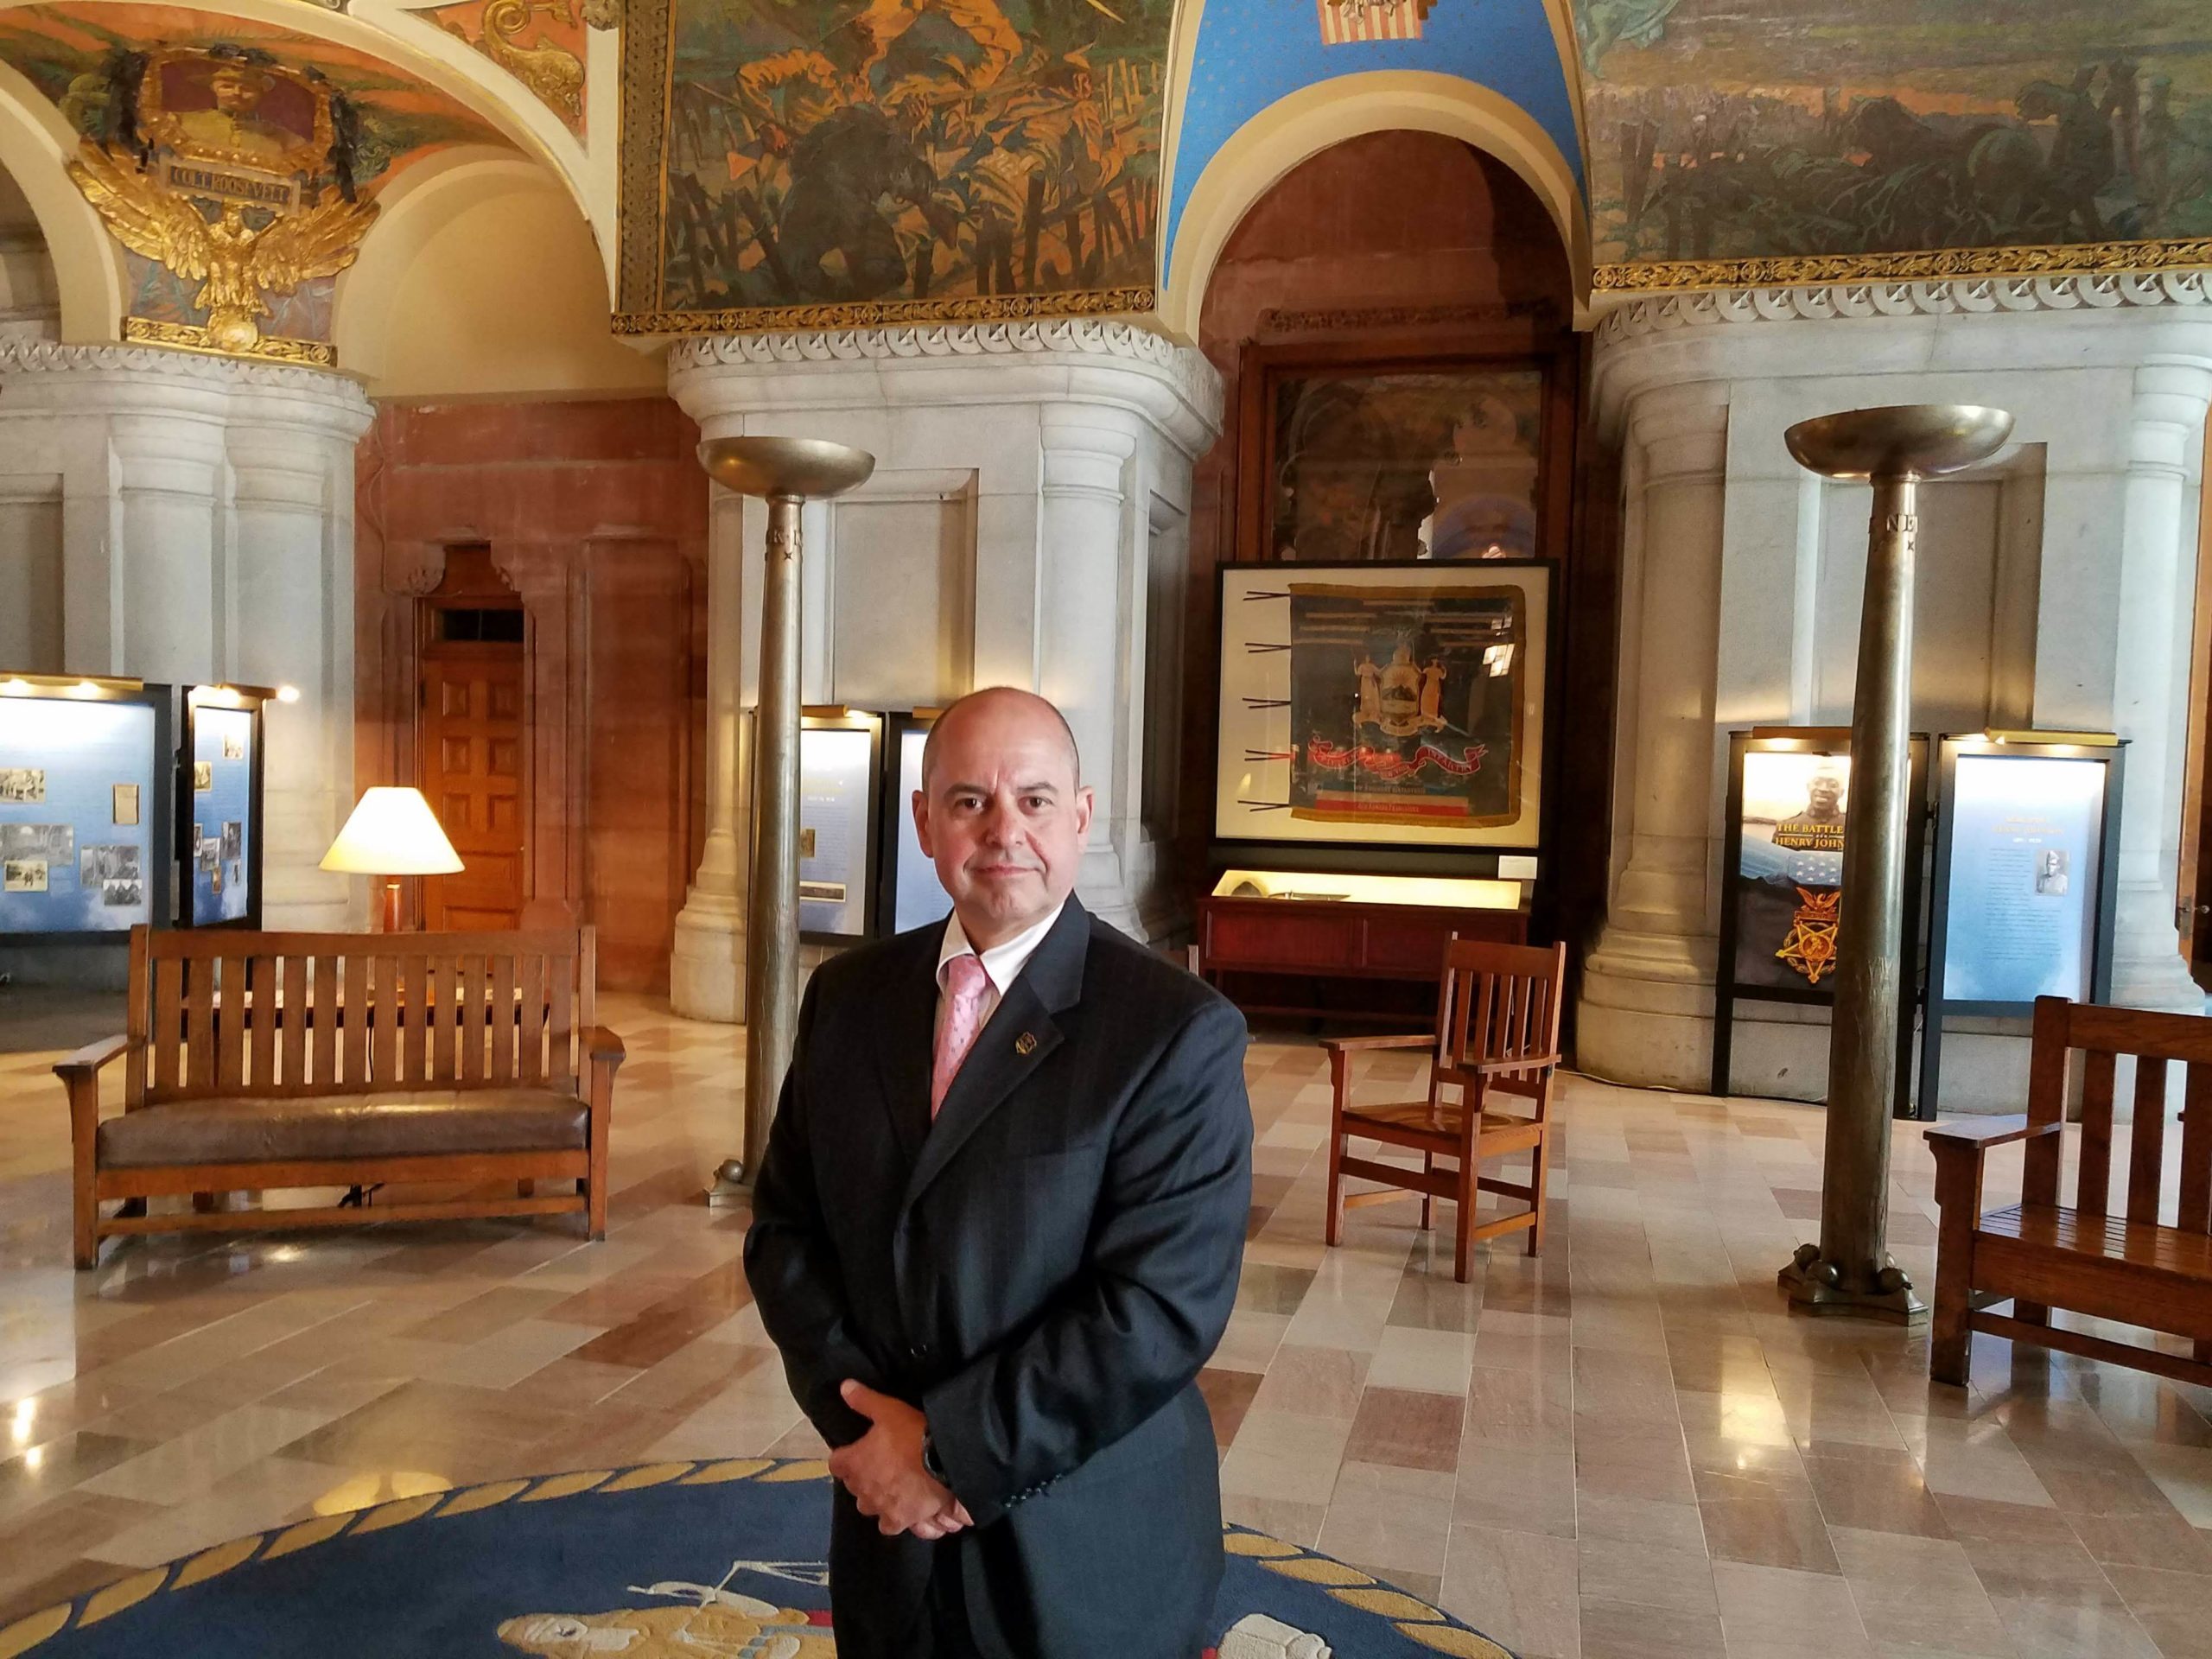 Manny Vilar was elected this week to again serve as the president and CEO of the Police Benevolent Association of New York State.